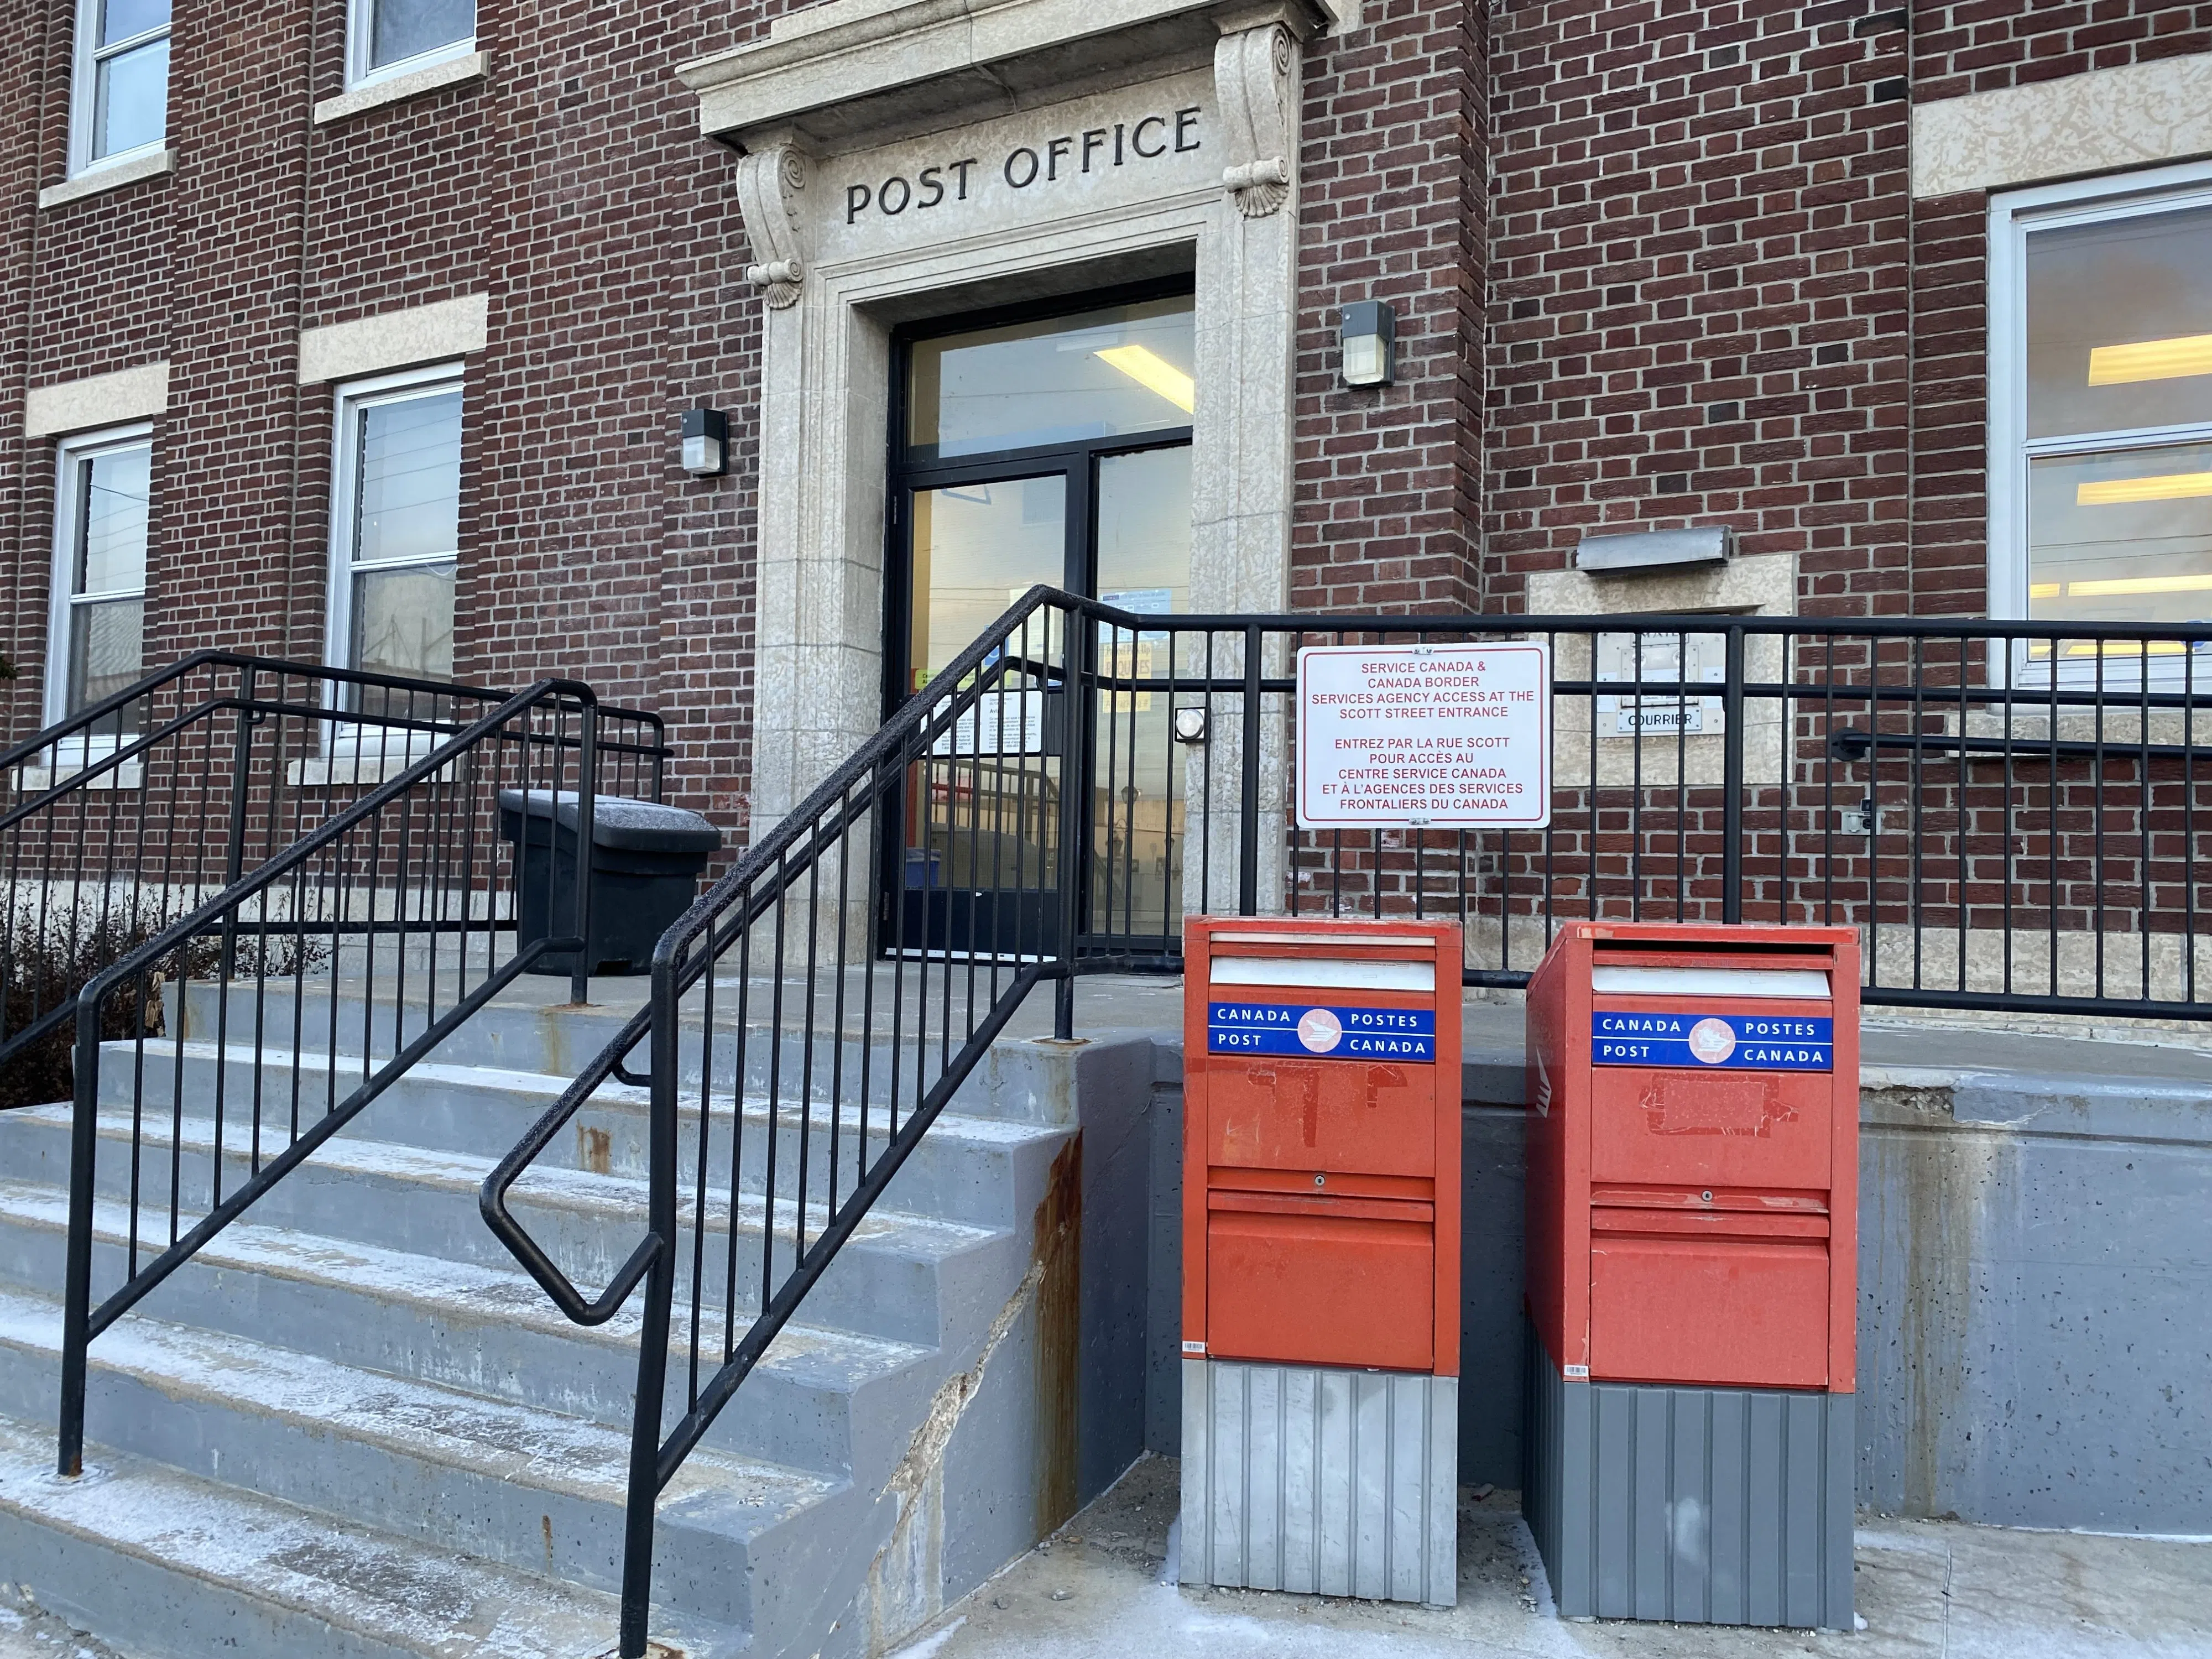 Second person charged related to mail theft case